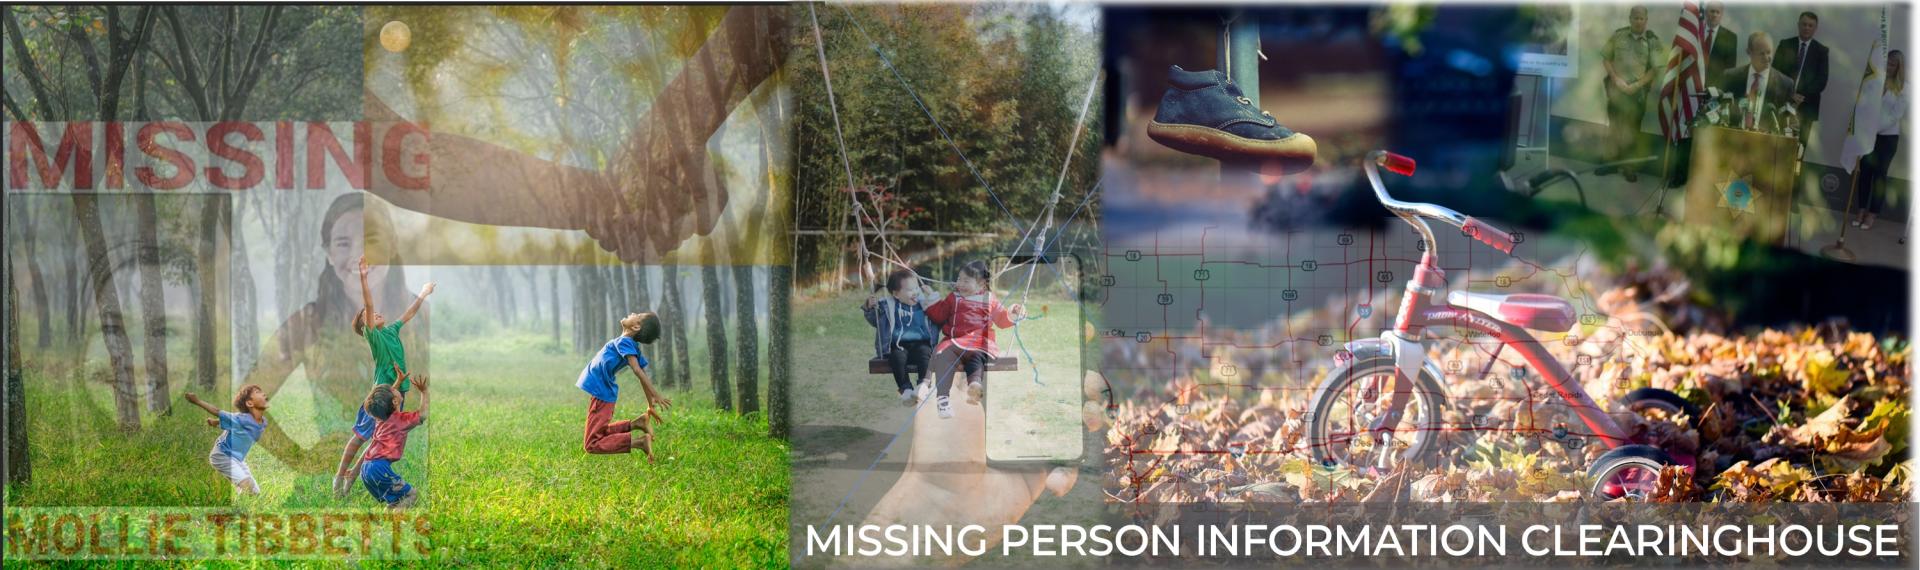 Missing Persons Information Clearinghouse 